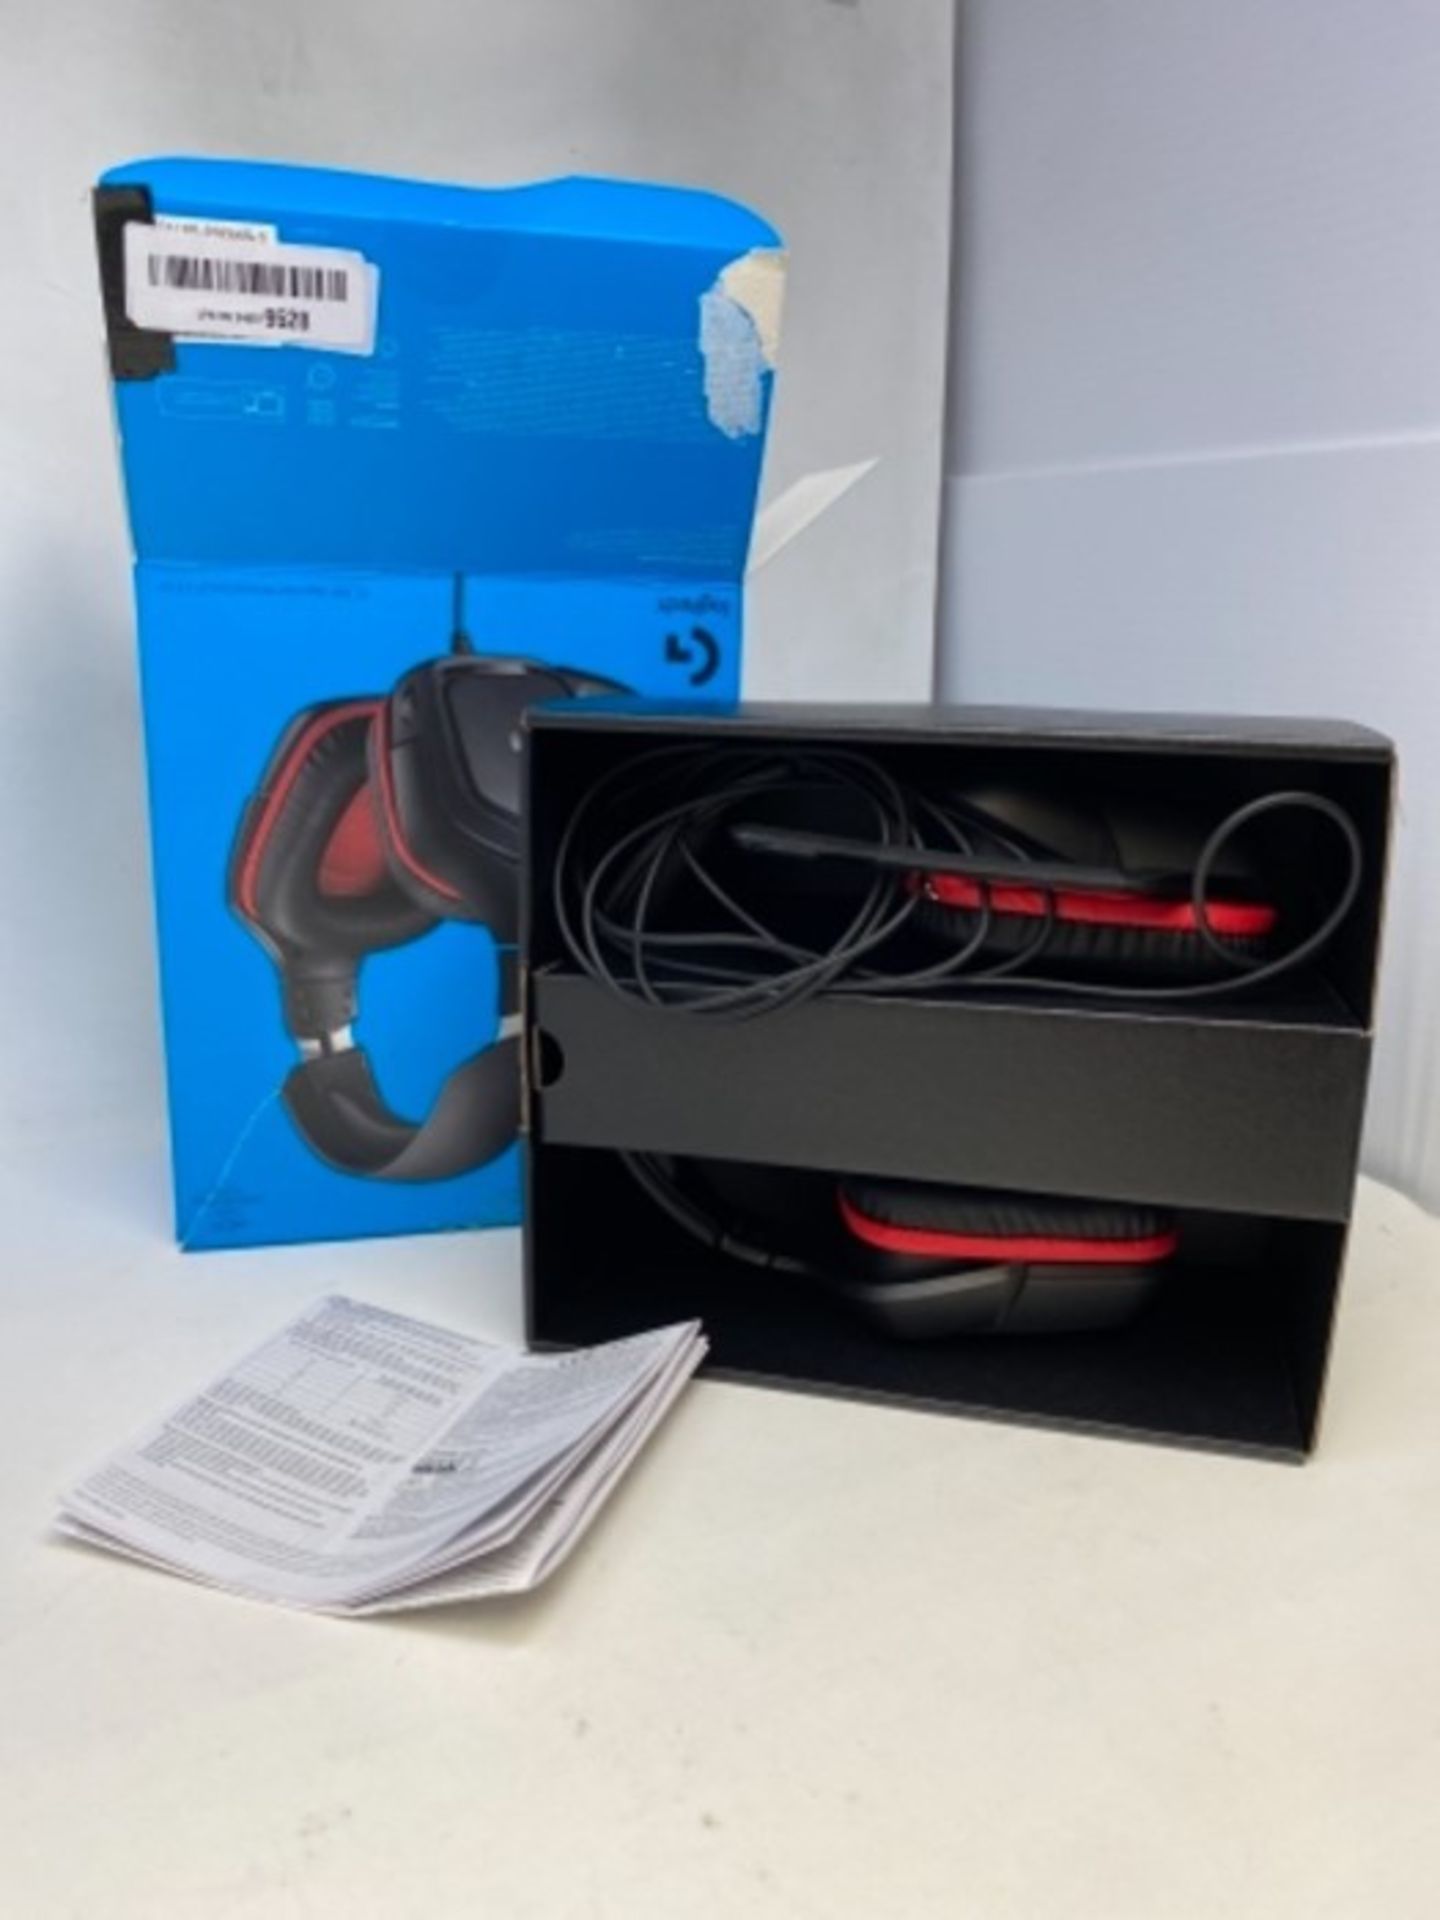 Logitech G332 Wired Gaming Headset, 50 mm Audio Drivers, Rotating Leatherette Ear Cups - Image 2 of 2